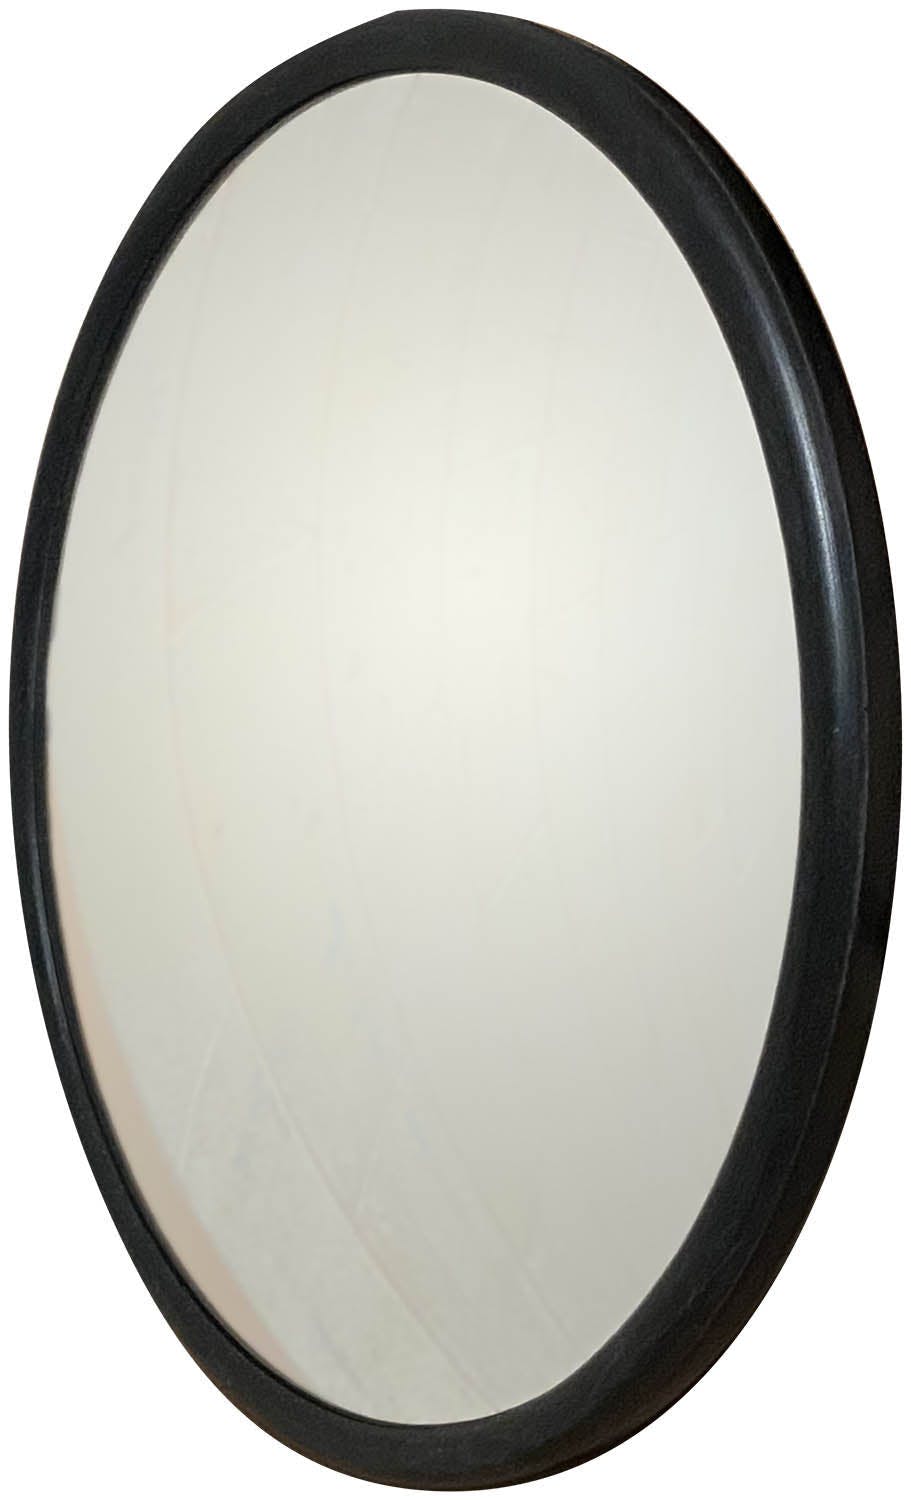 Mirror, Convex, Round, Black, 8", display box (Pack of 6) - 608-front